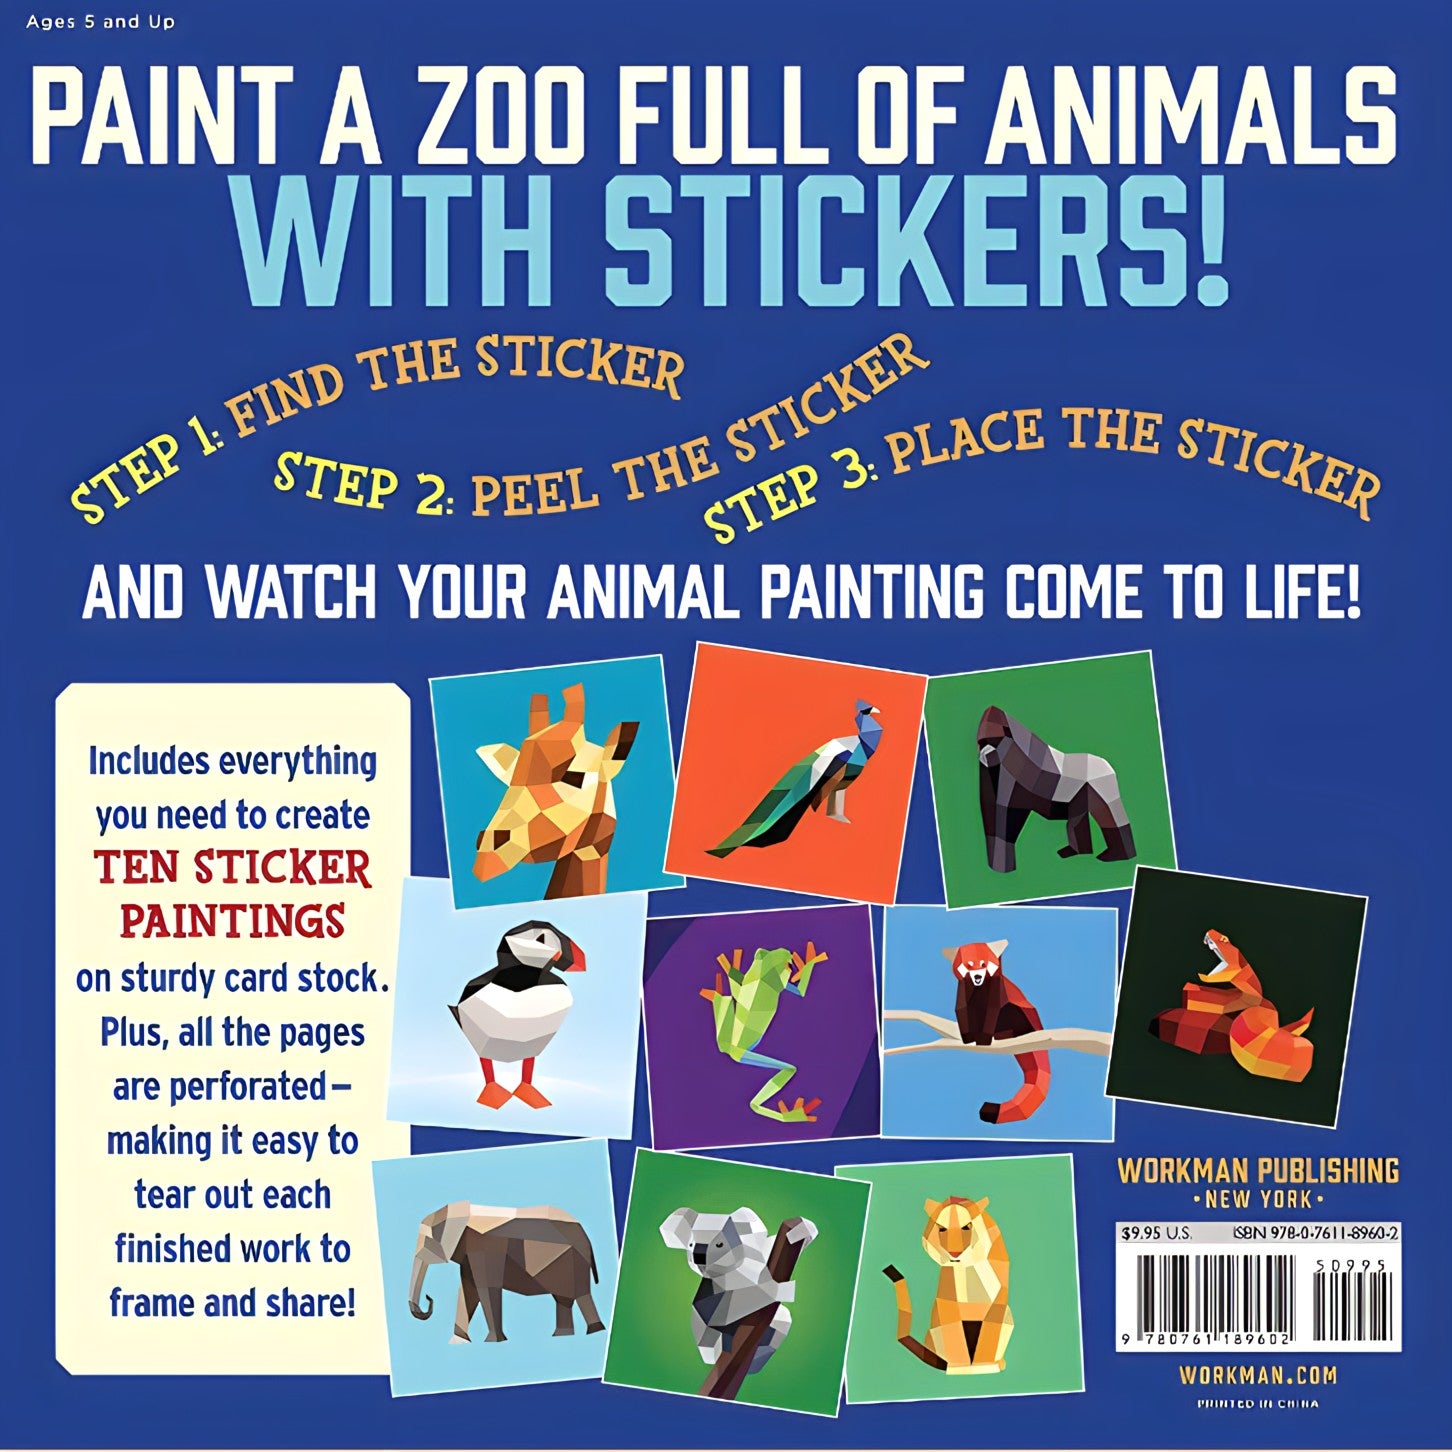 Paint by Stickers // Zoo Animals